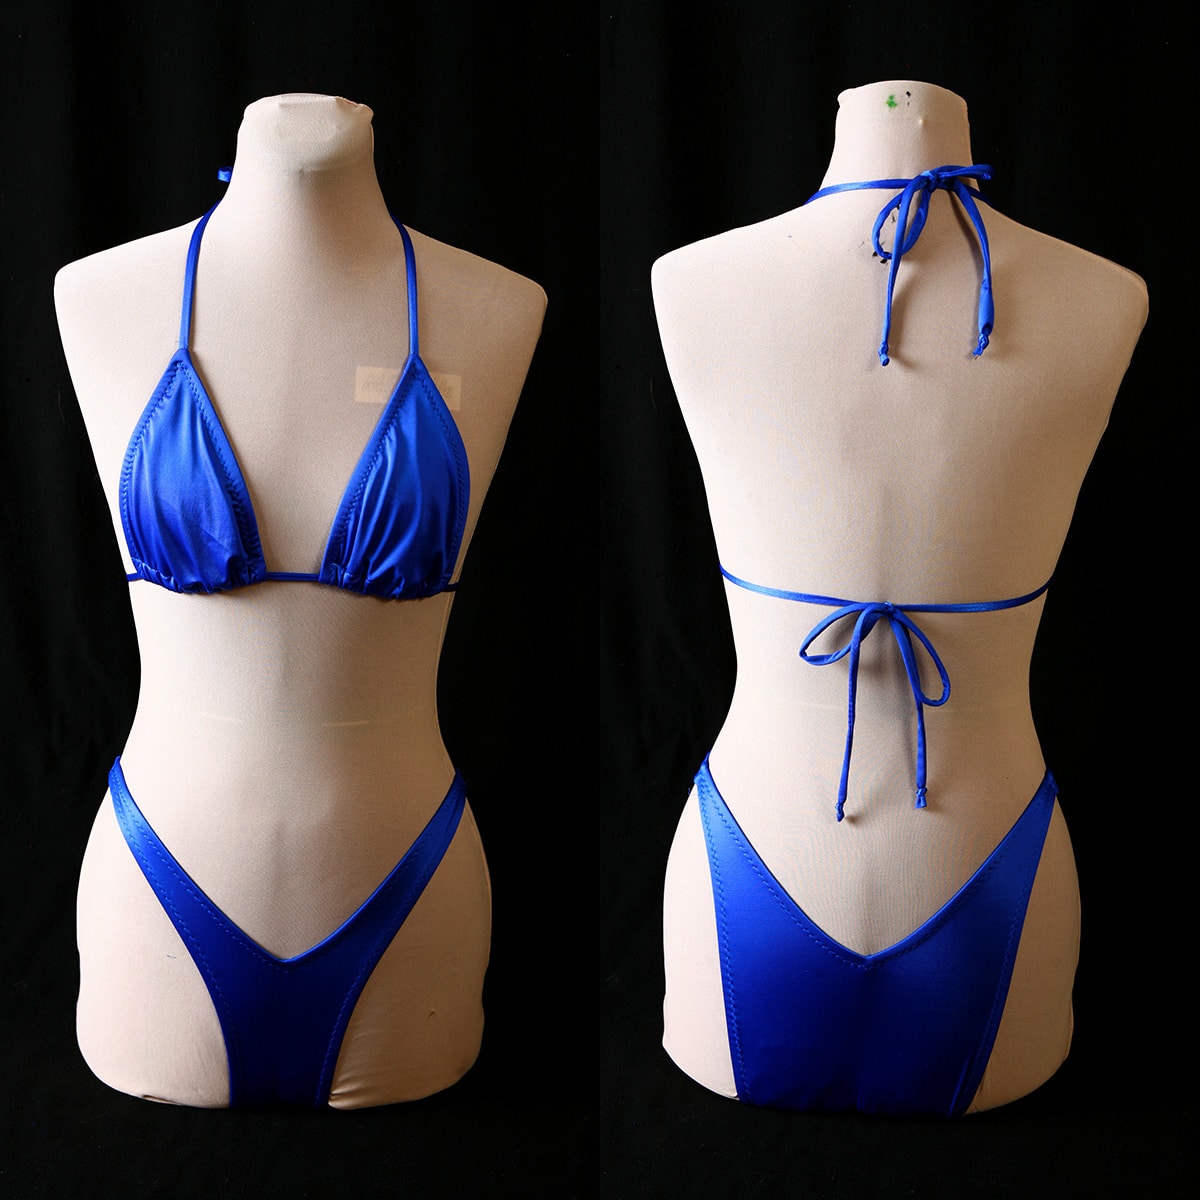 Front and back views of a blue string bikini on a dress form.